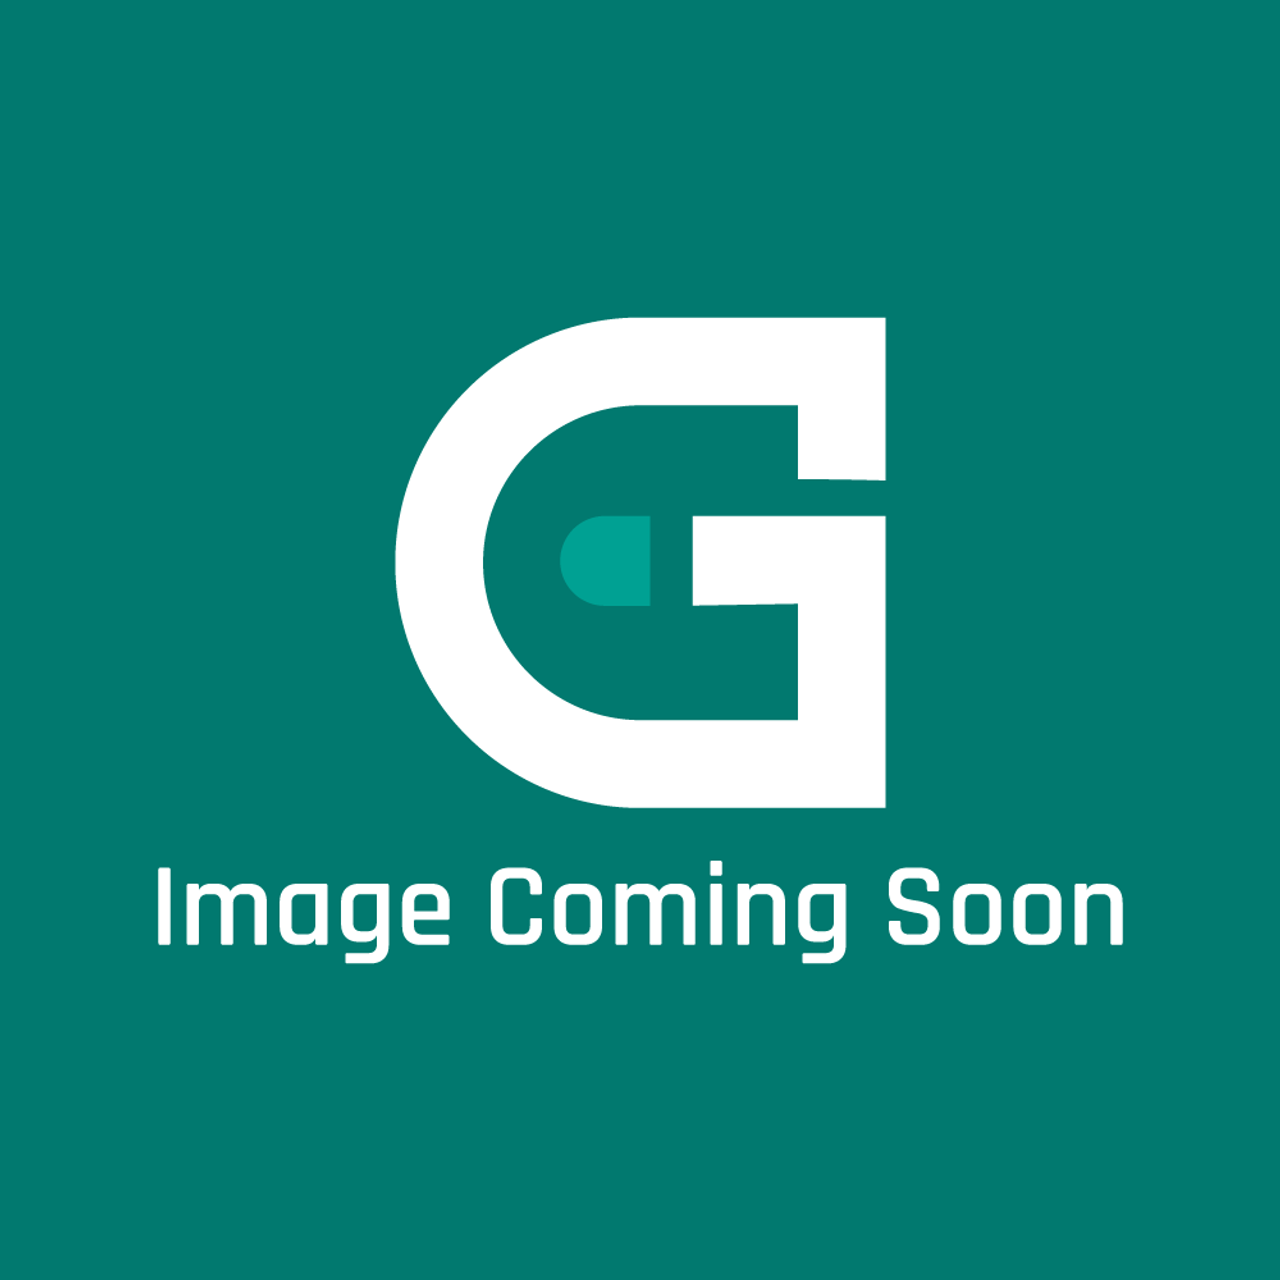 Frigidaire - Electrolux 5304526187 Grate - Image Coming Soon!